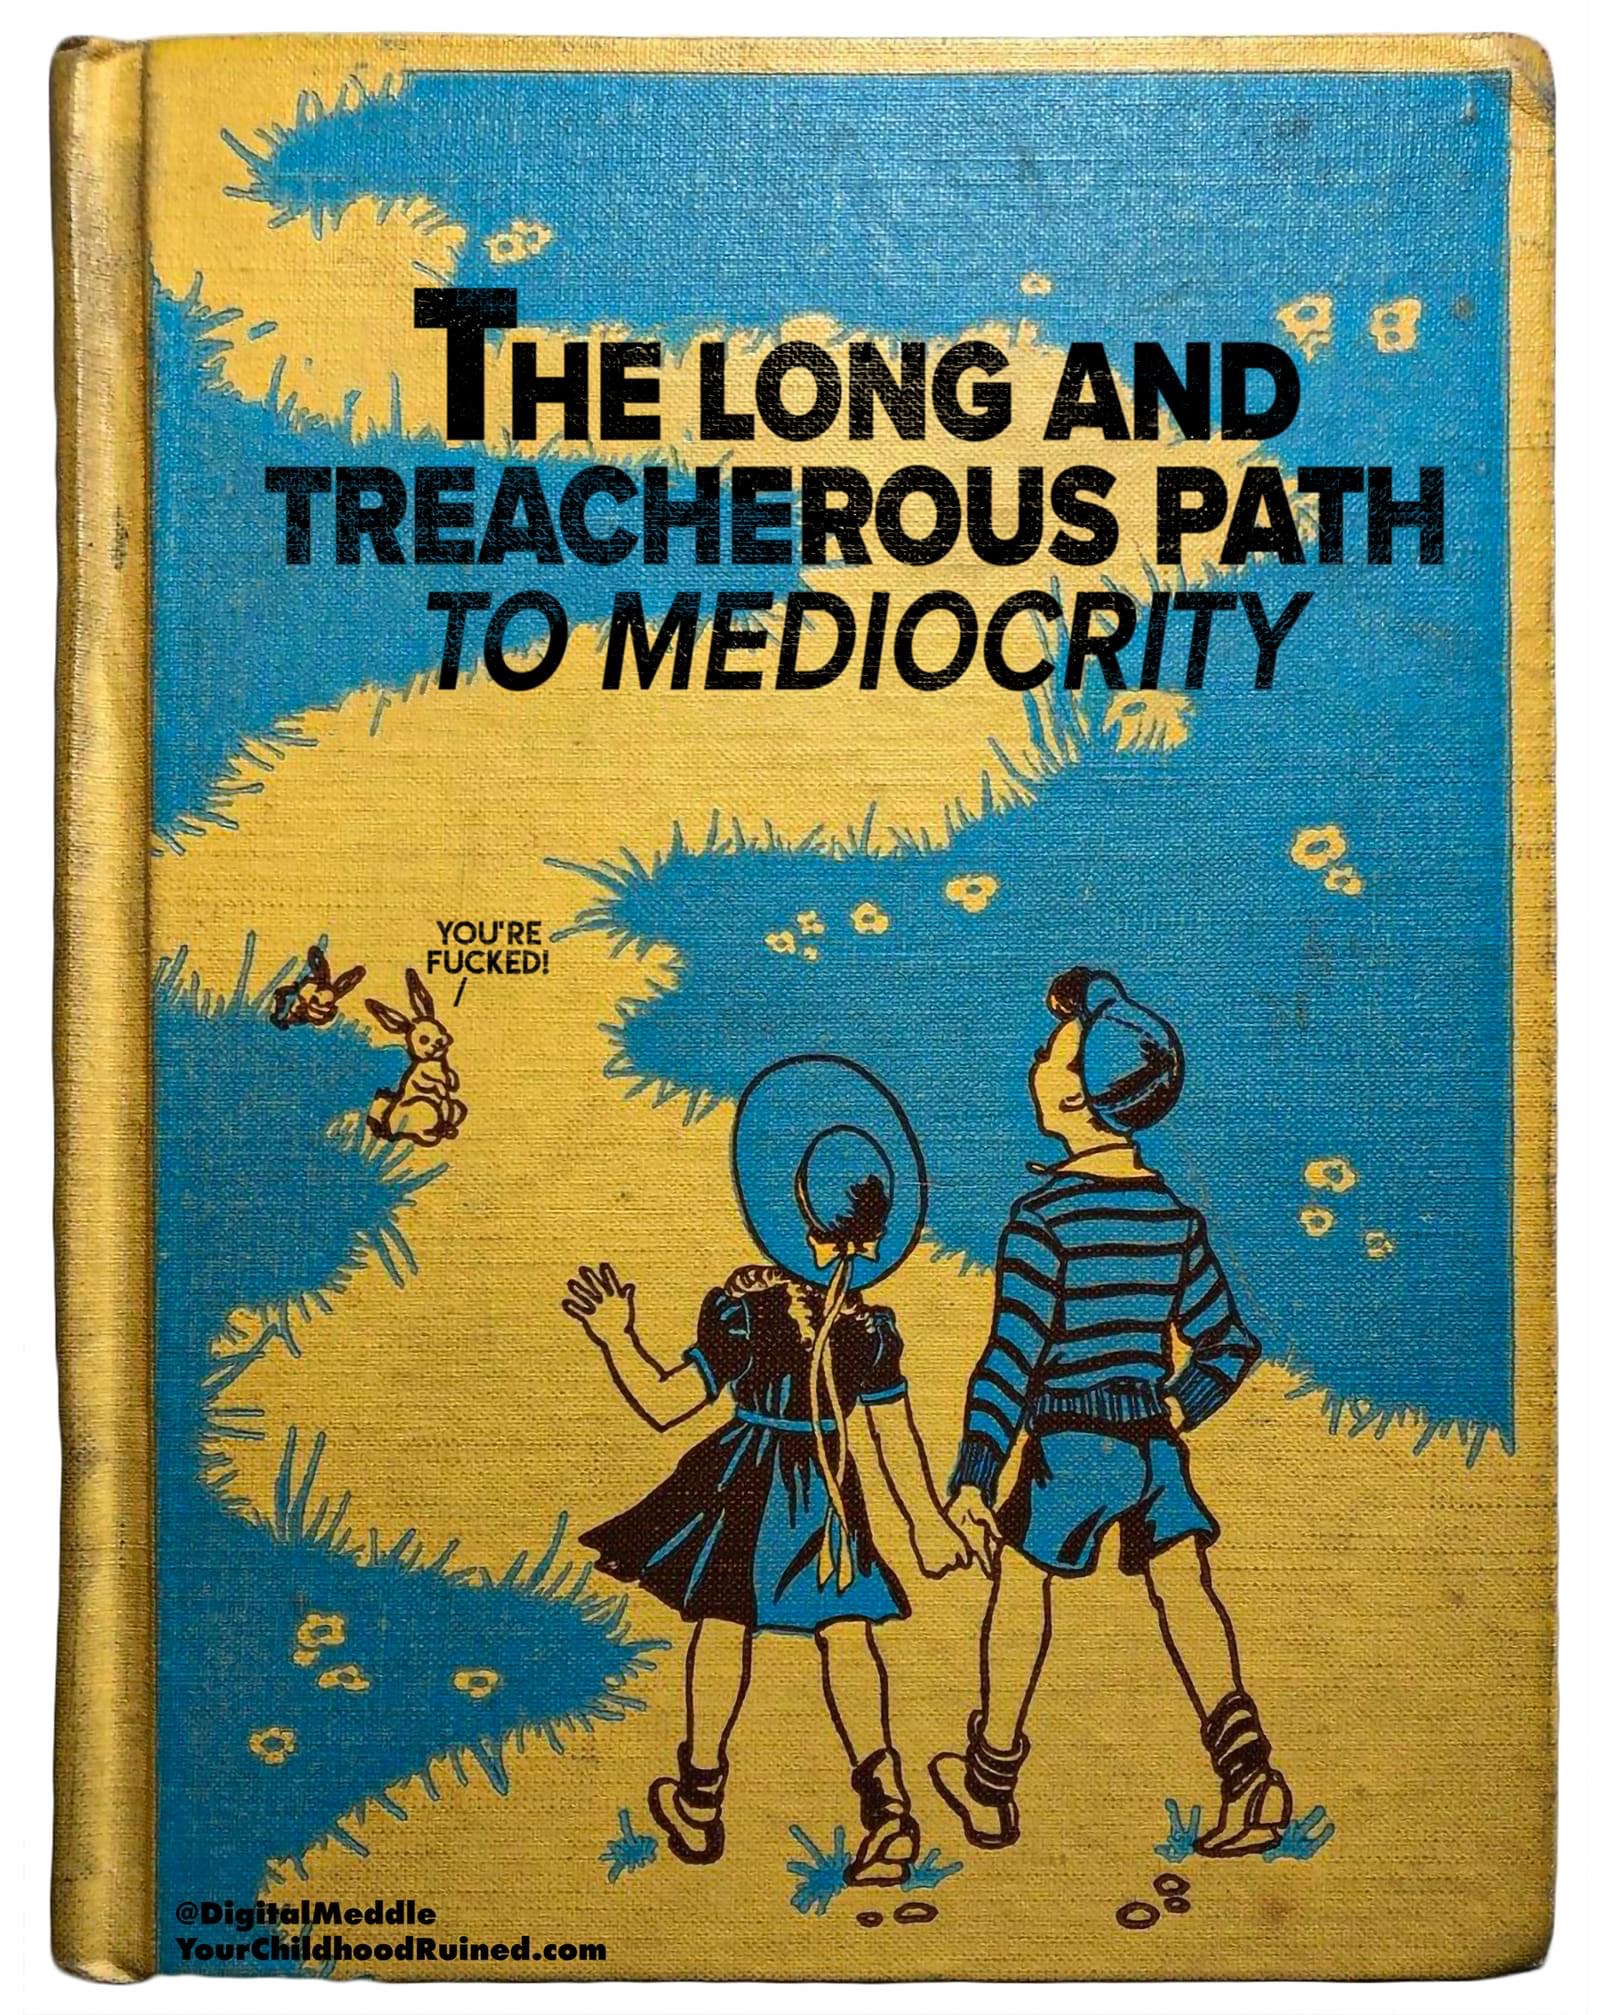 poster - 8 The Long And Treacherous Path To Mediocrity You'Re Fucked DigitalMeddle Your childhood Ruined.com